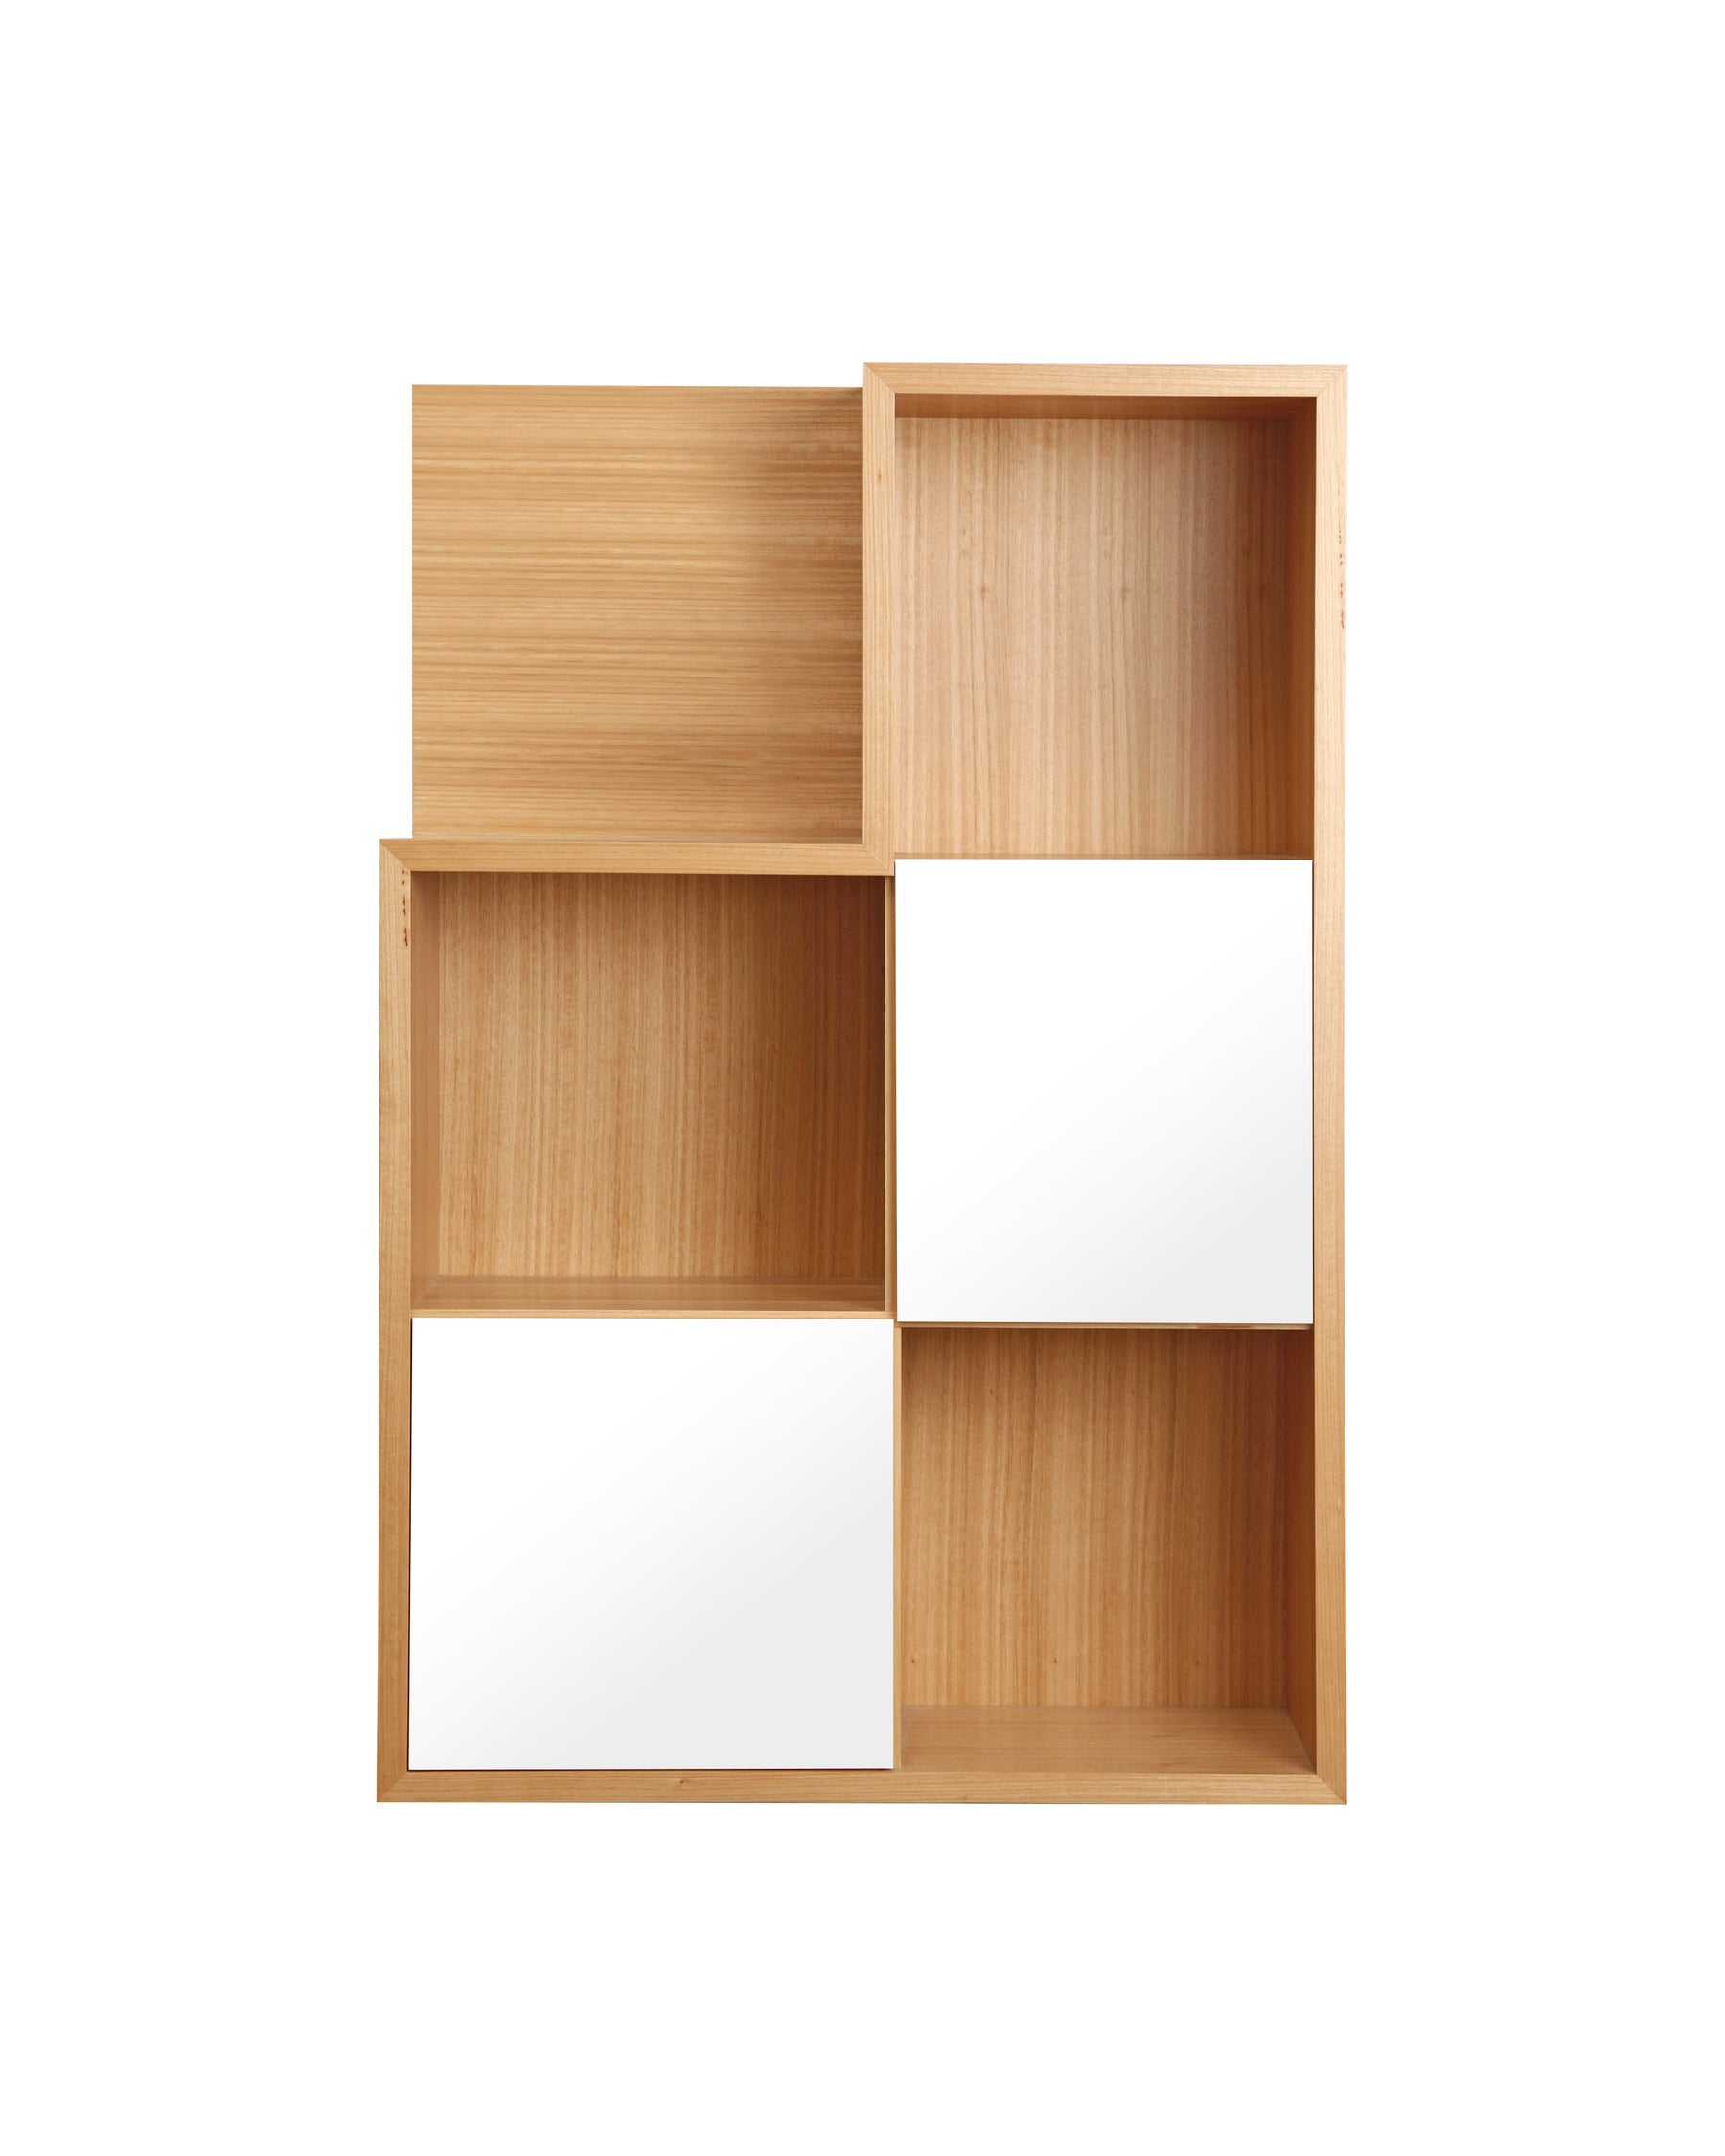 Colour Box Bookcase features a timber frame which encases itself around four generously sized open cavities (for the tallest of books) plus two hinged painted doors, top opens to right and bottom opens to left. Designed to perfectly co-ordinate with our Colour Box collection of kid's furniture.